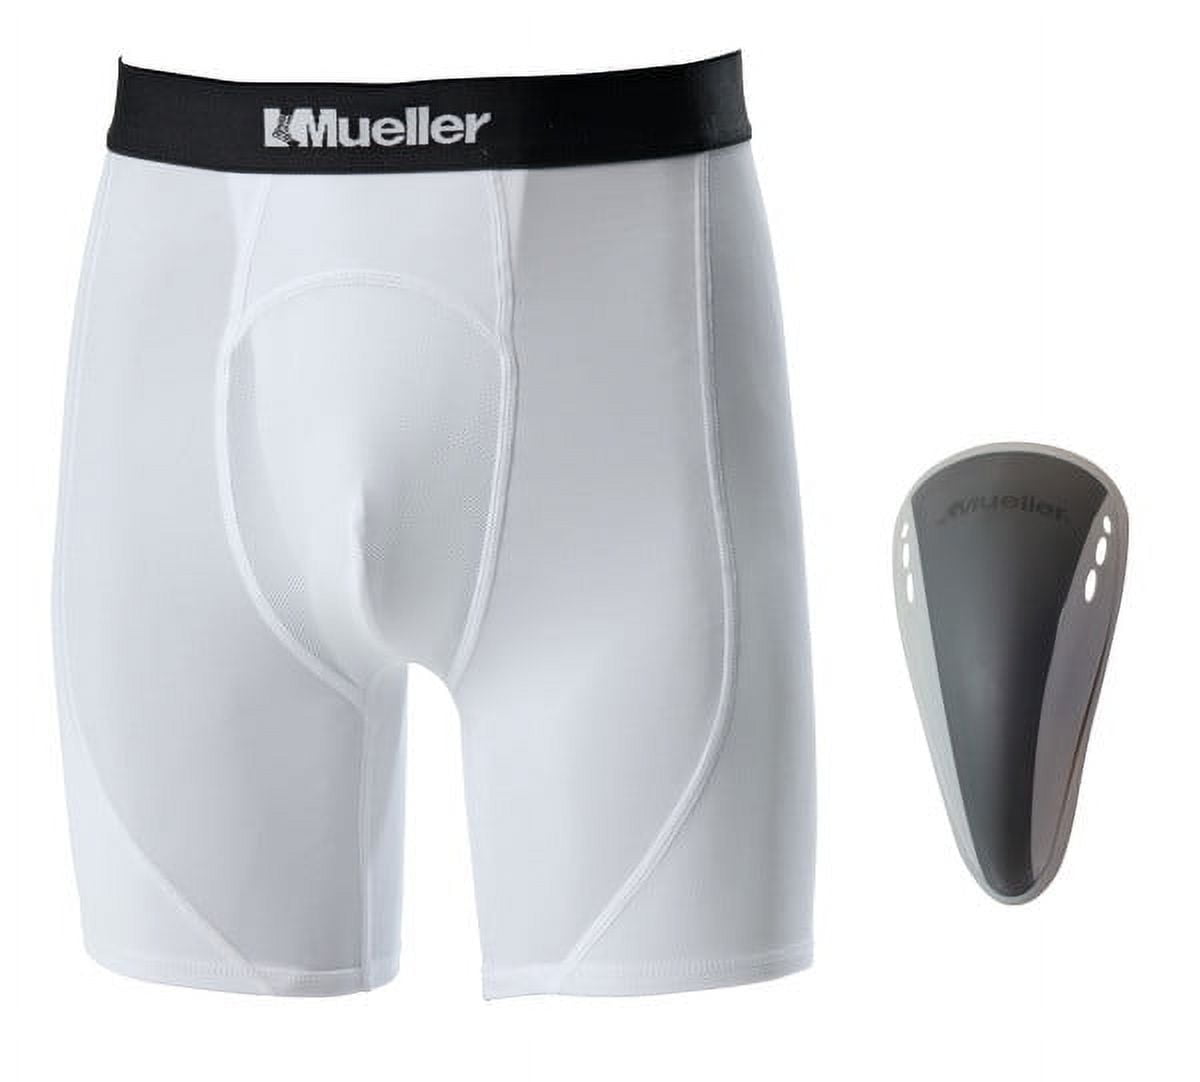 Mueller Athletic Support Shorts with Flex Shield Cup, White/Gray, Adult ...